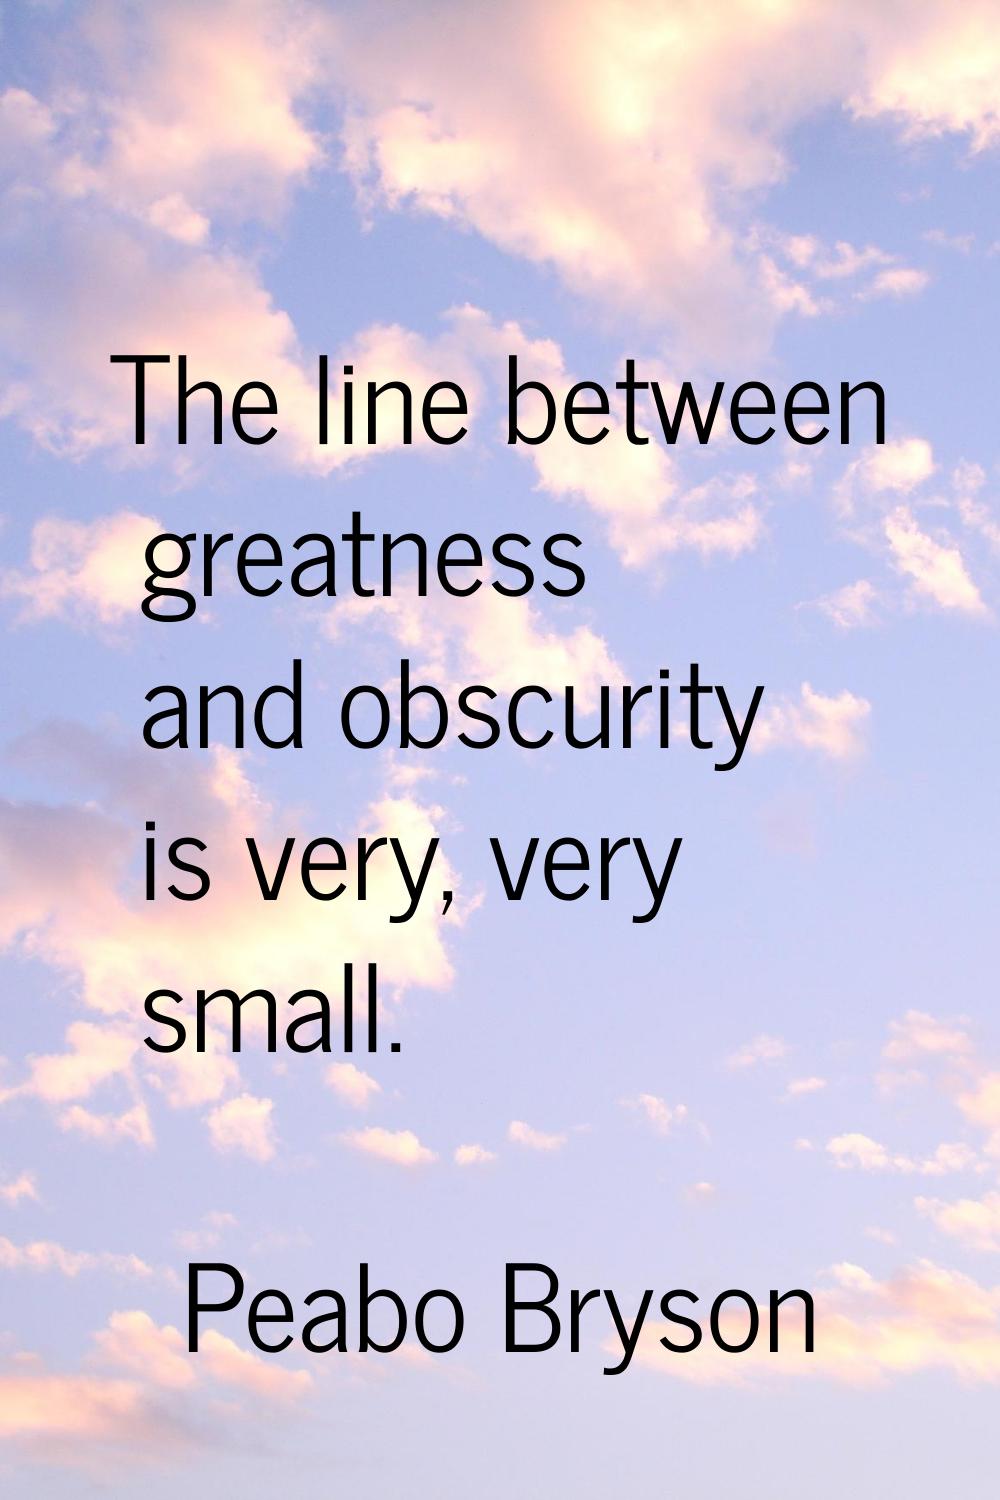 The line between greatness and obscurity is very, very small.